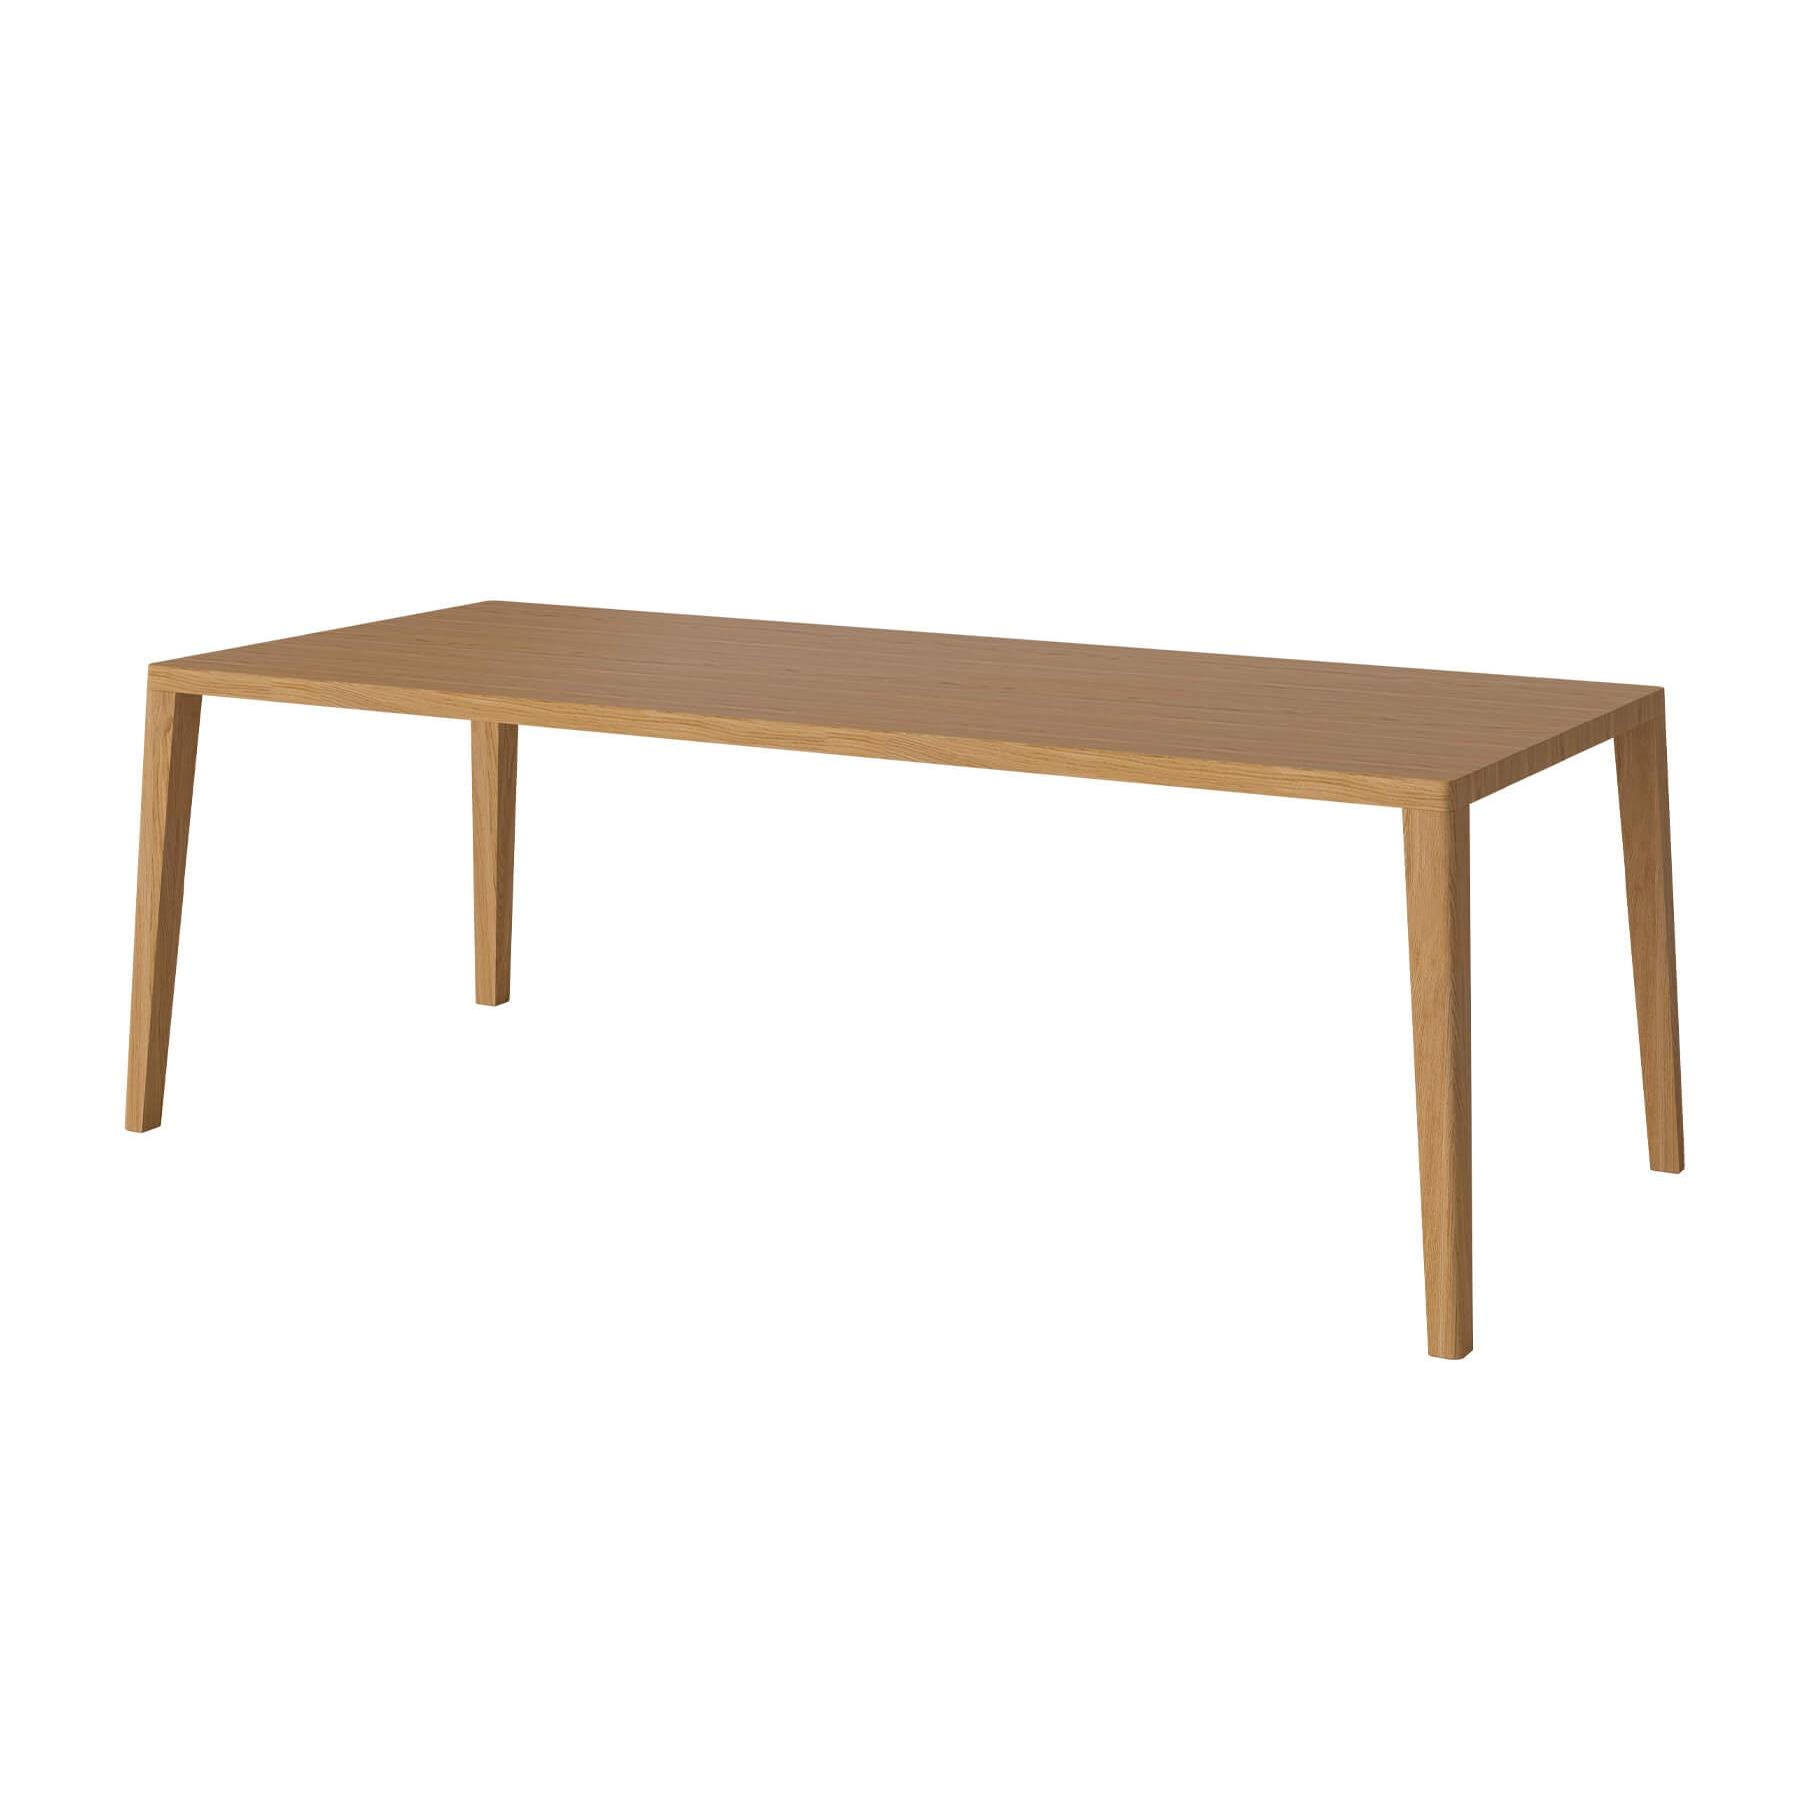 Bolia Graceful Dining Table 220 X 95cm Oiled Legs With Extension Leaves Light Wood Designer Furniture From Holloways Of Ludlow